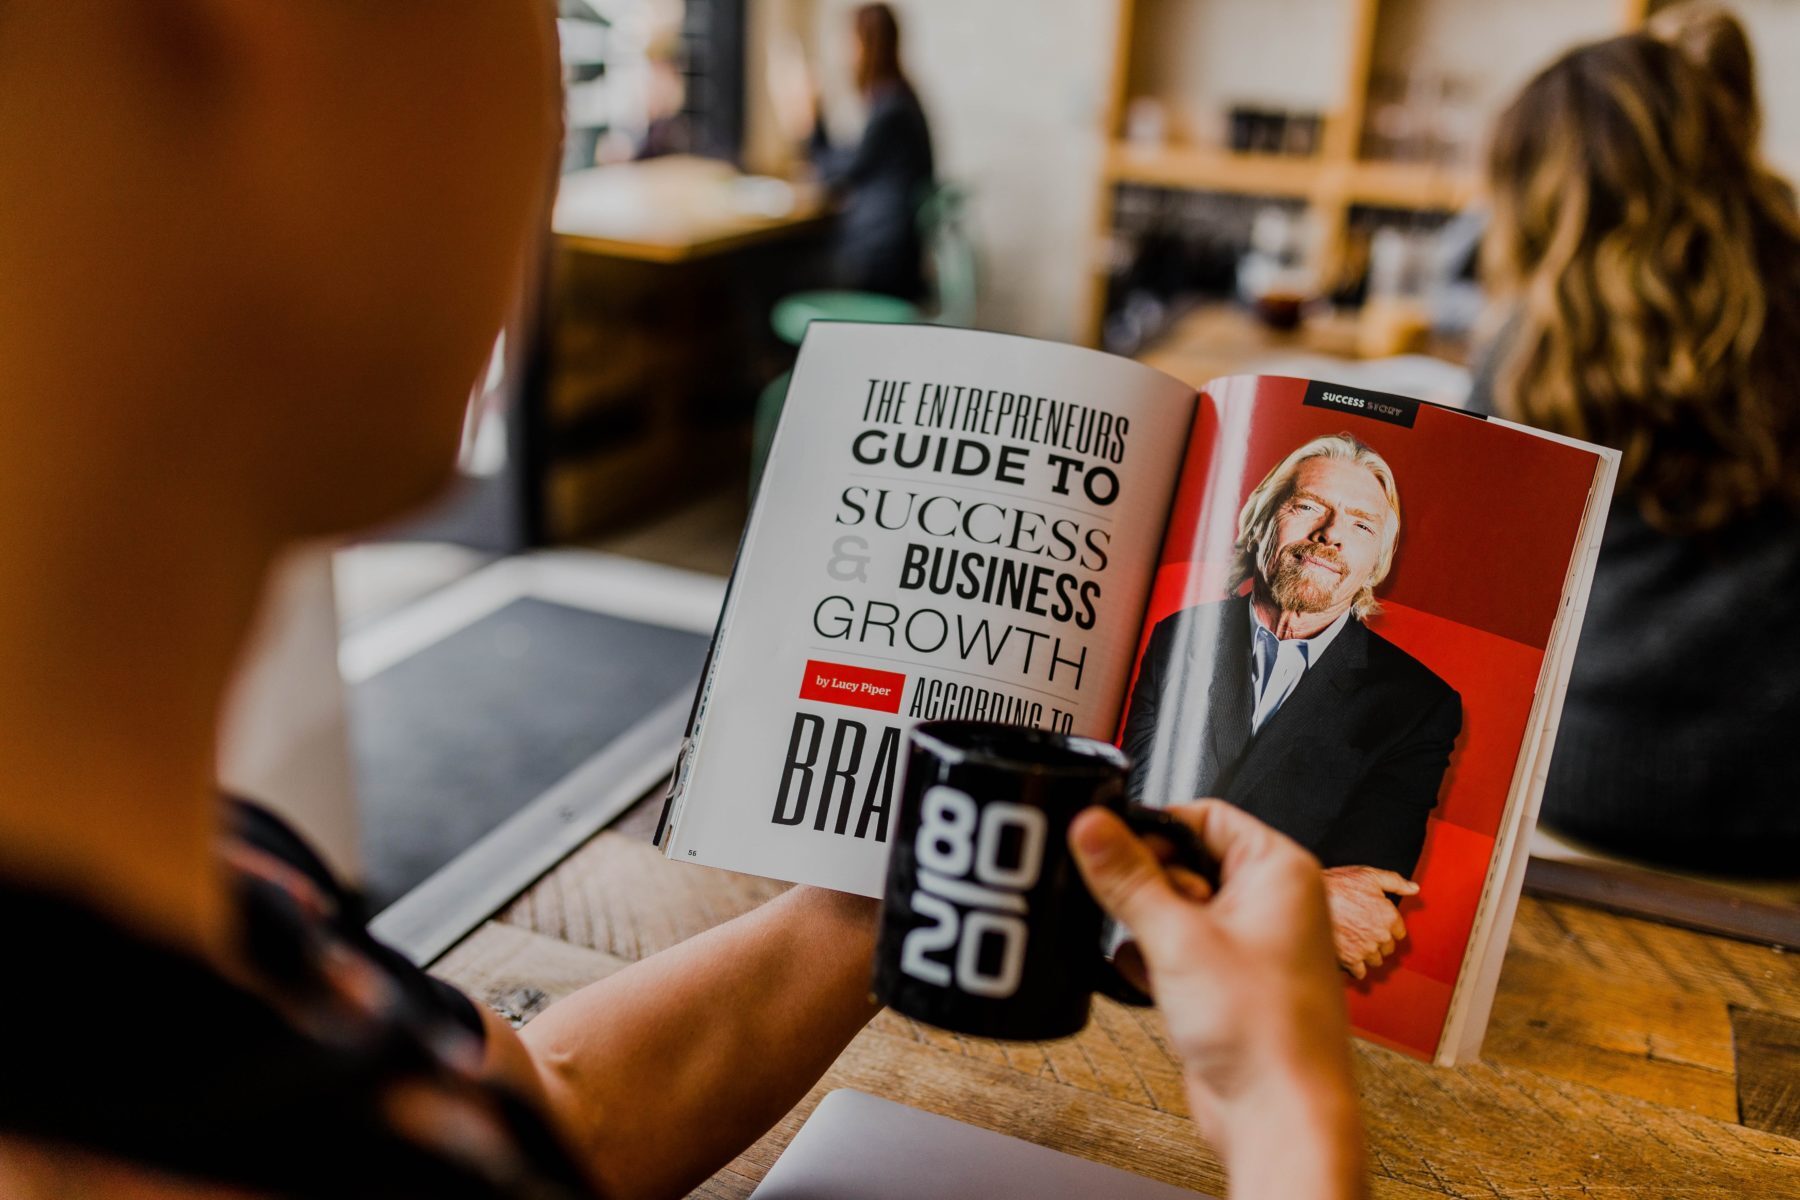 The entrepreneurs guide to success & business growth with Richard Branson